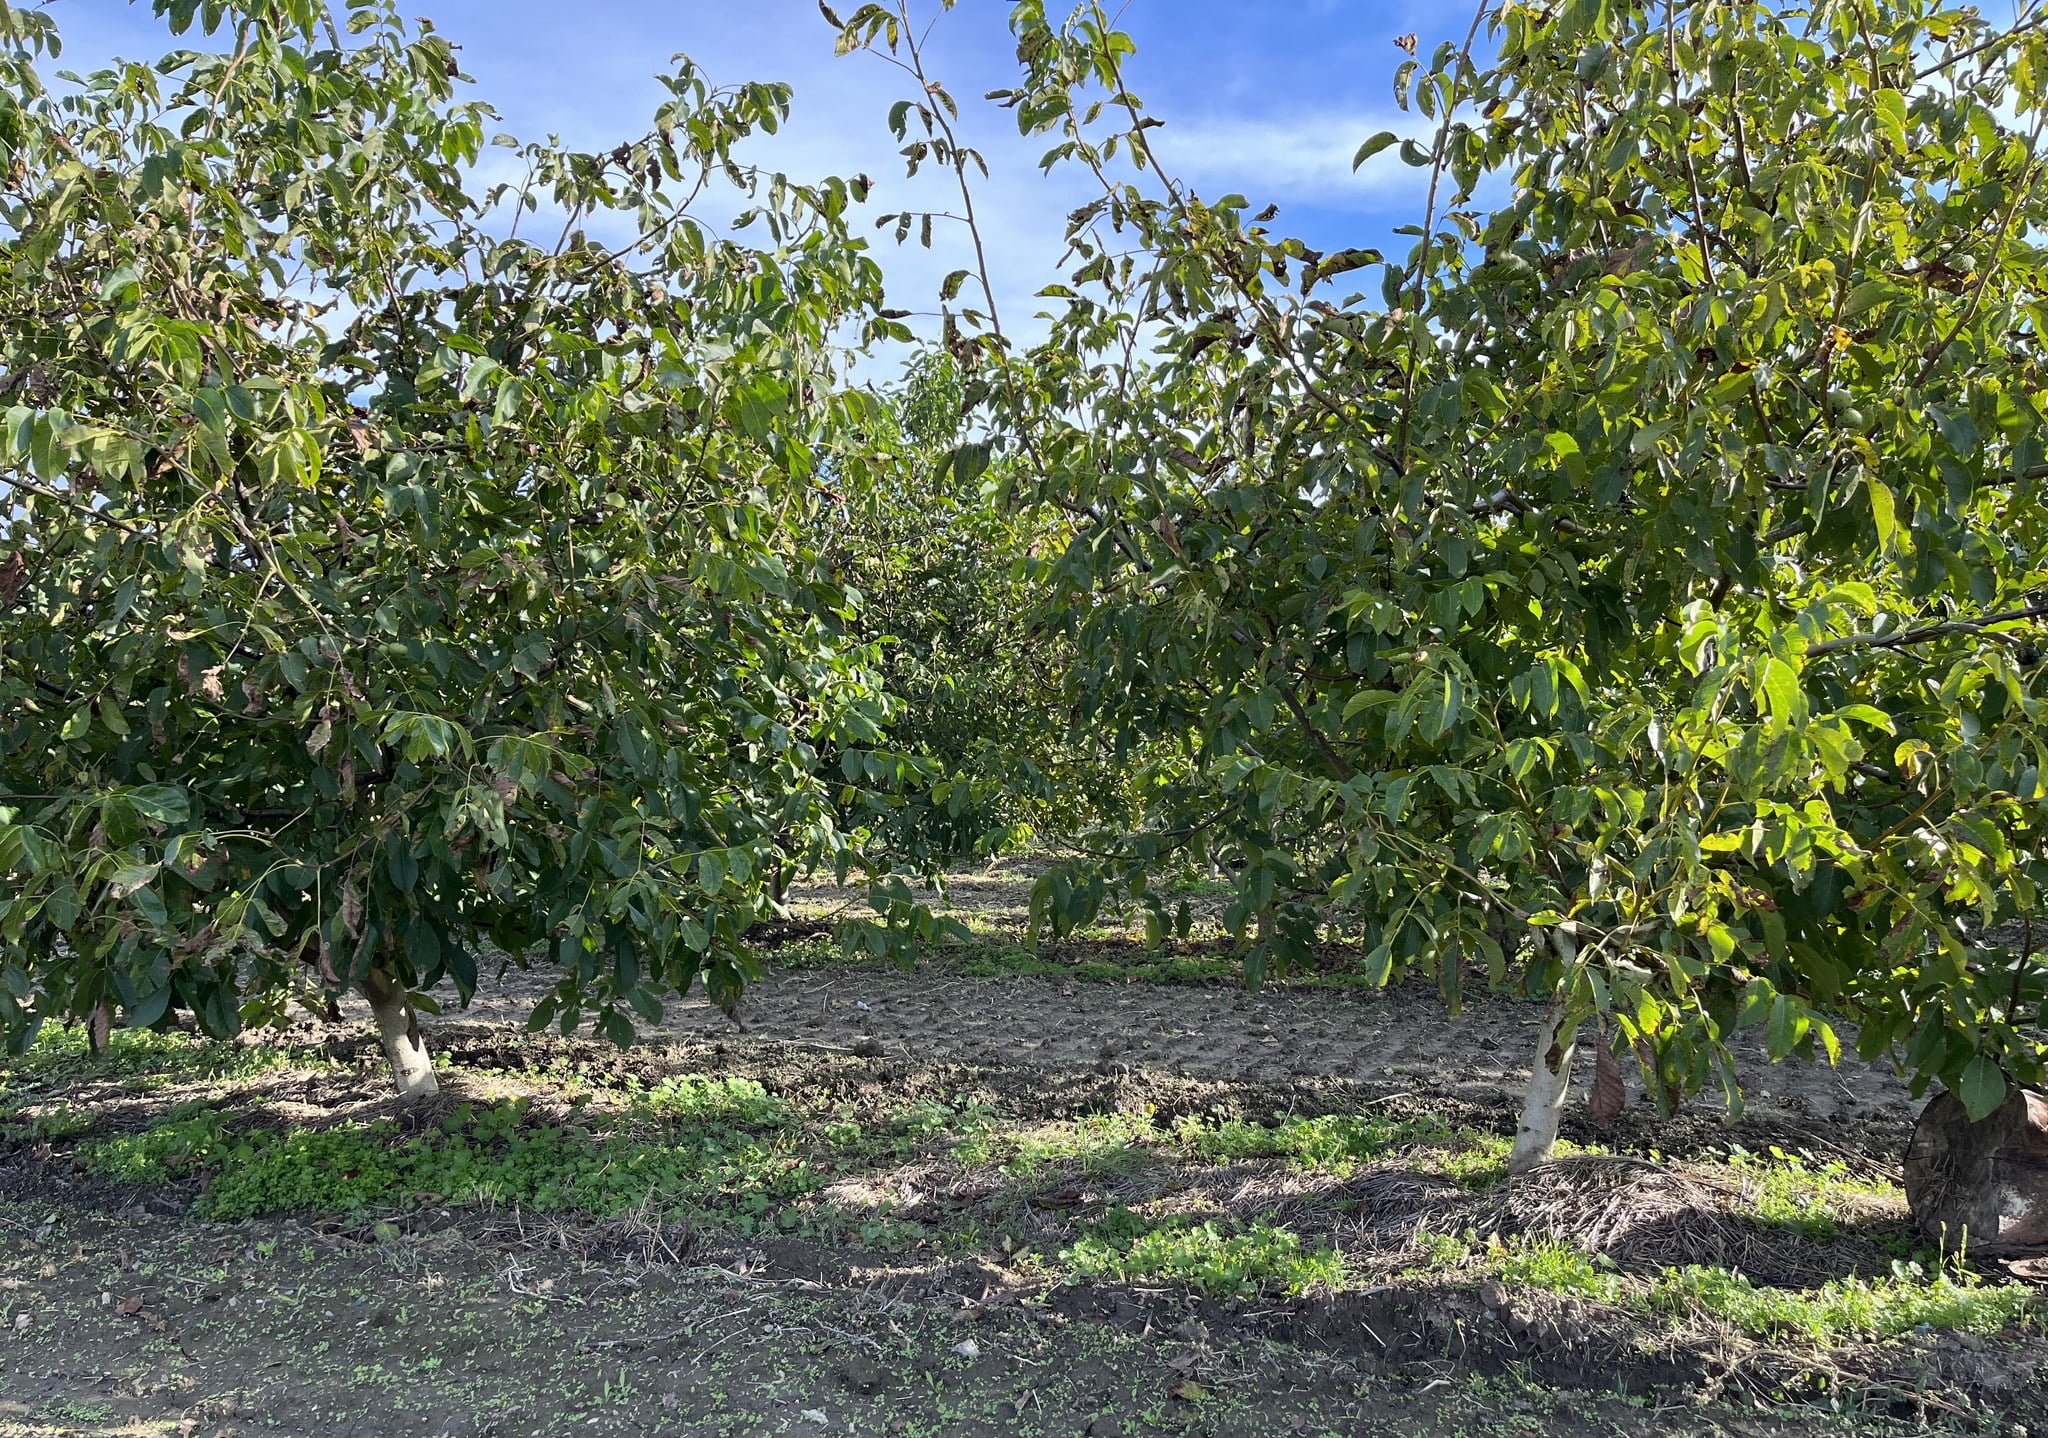 20% of nut orchards in Ukraine will be organic by 2030 - forecast ...